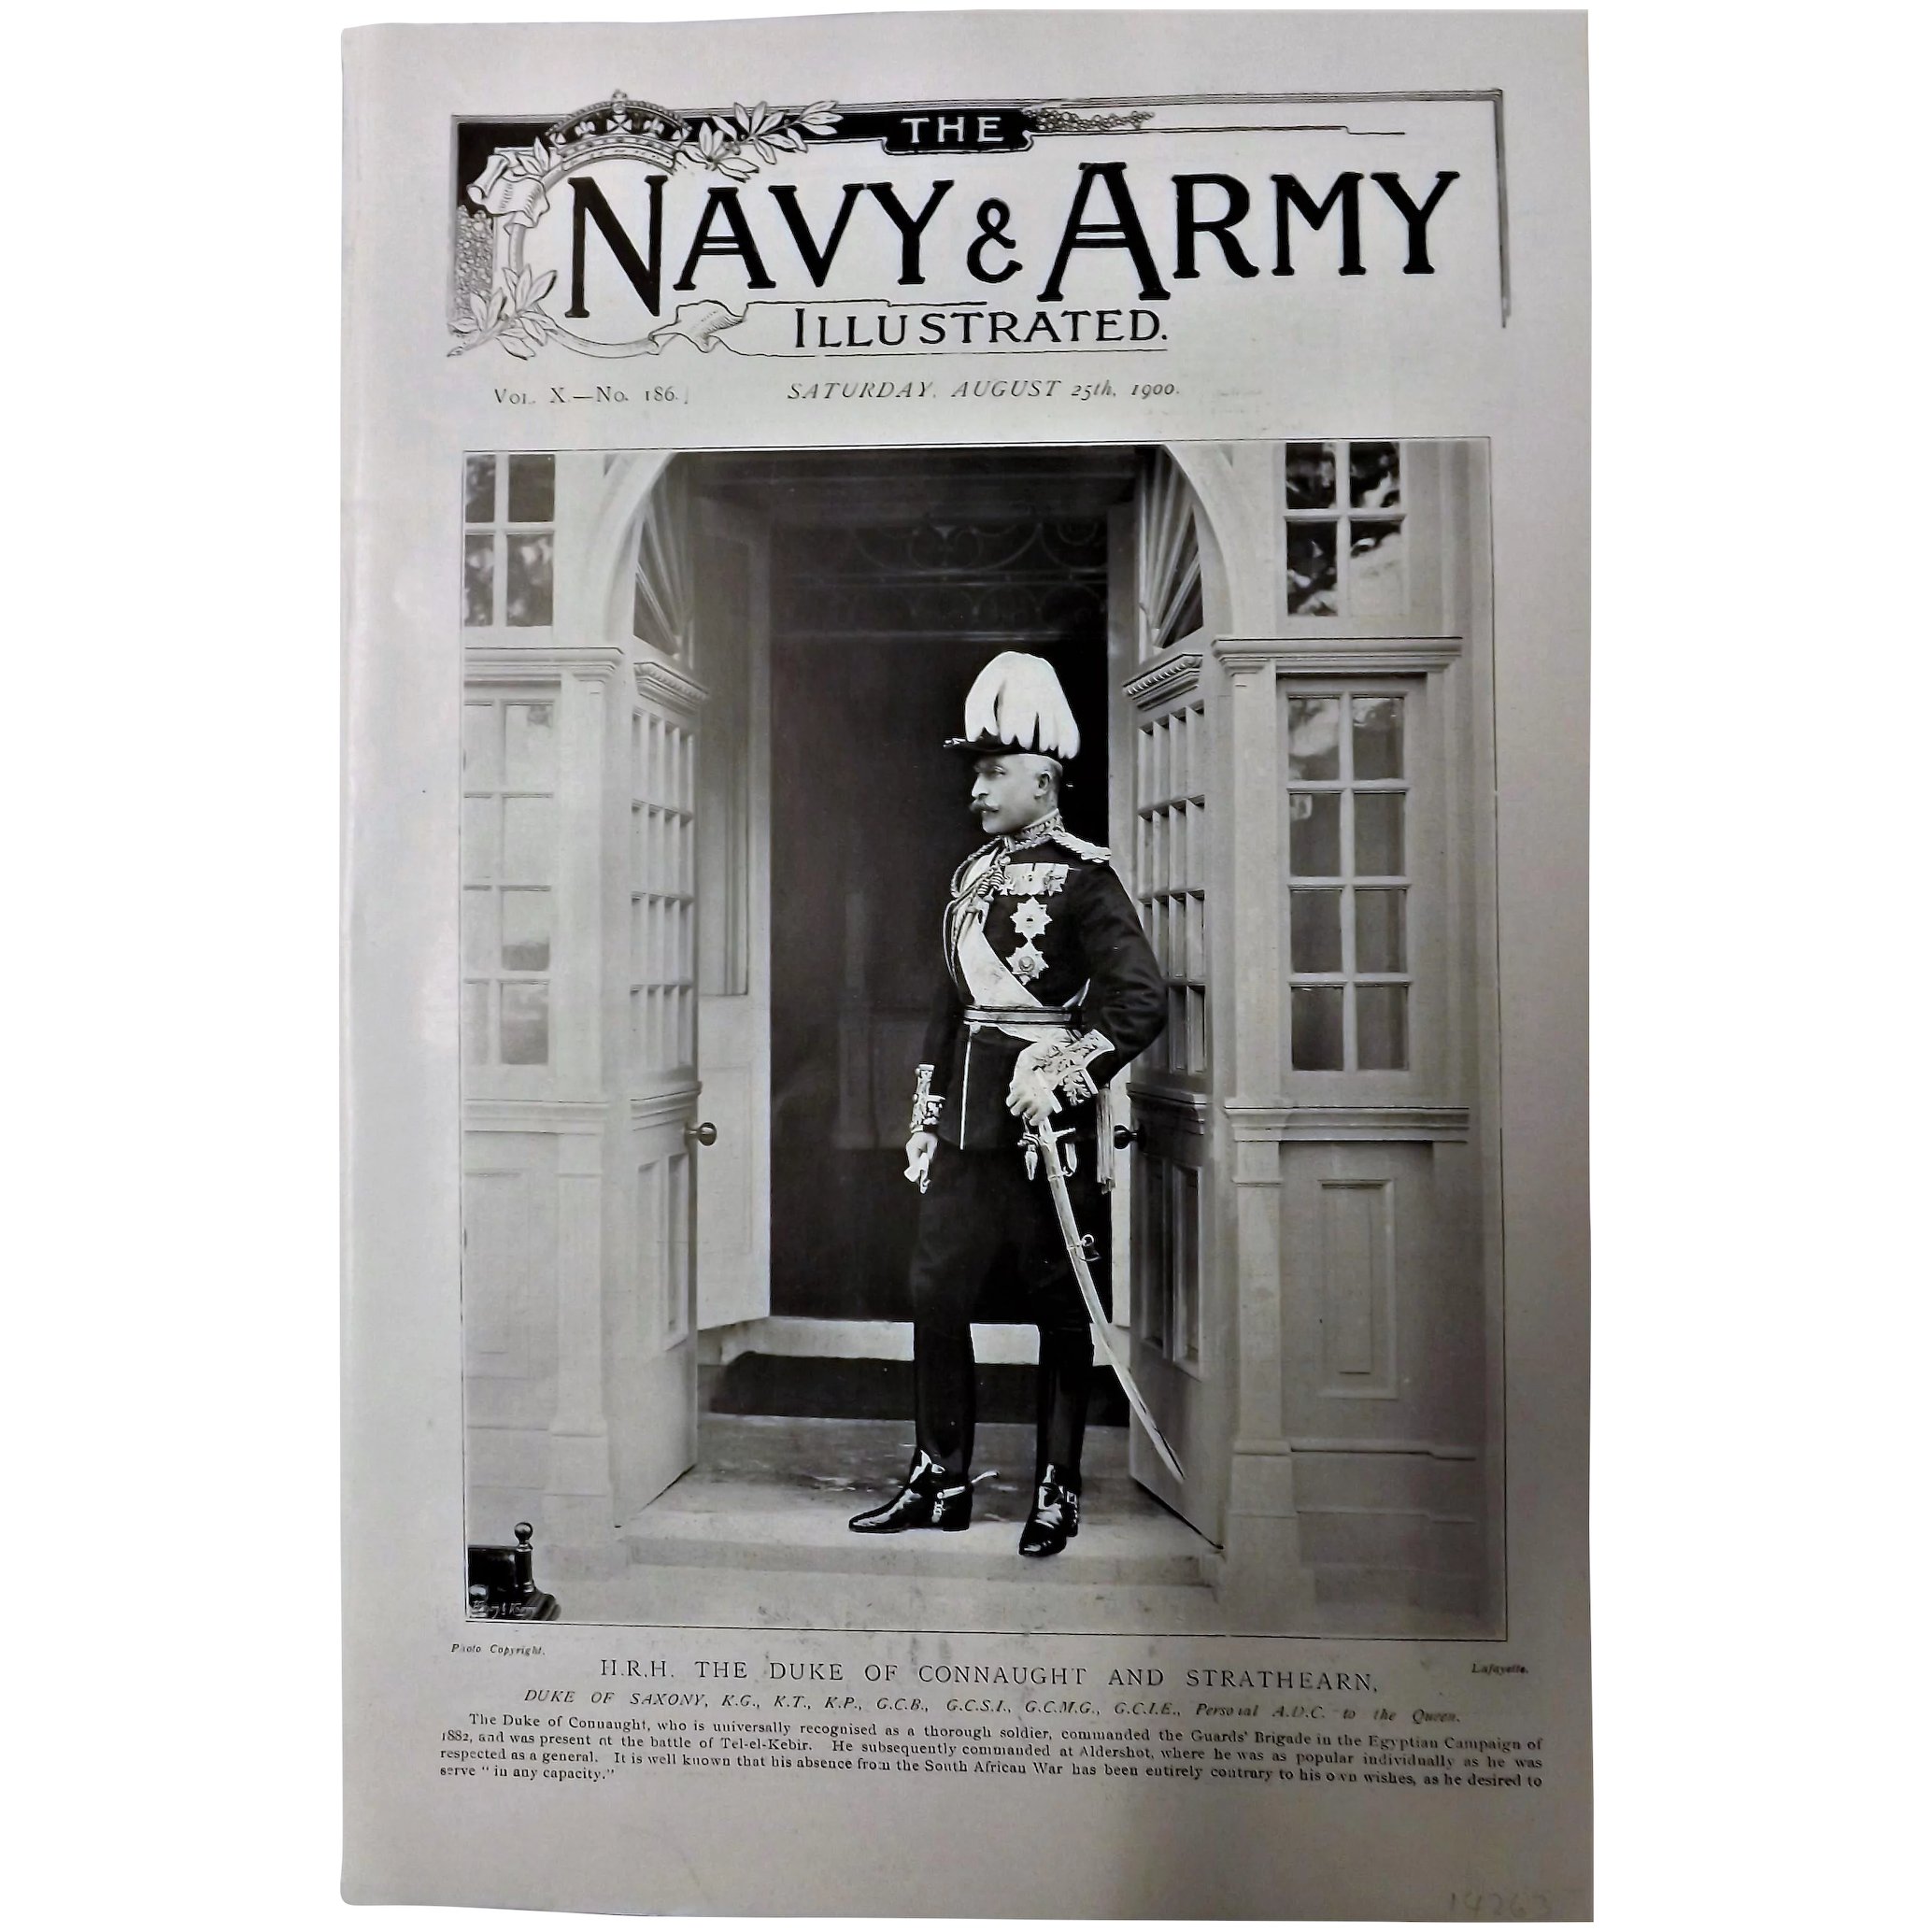 The Army & Navy Illustrated Magazine - August 25th 1900